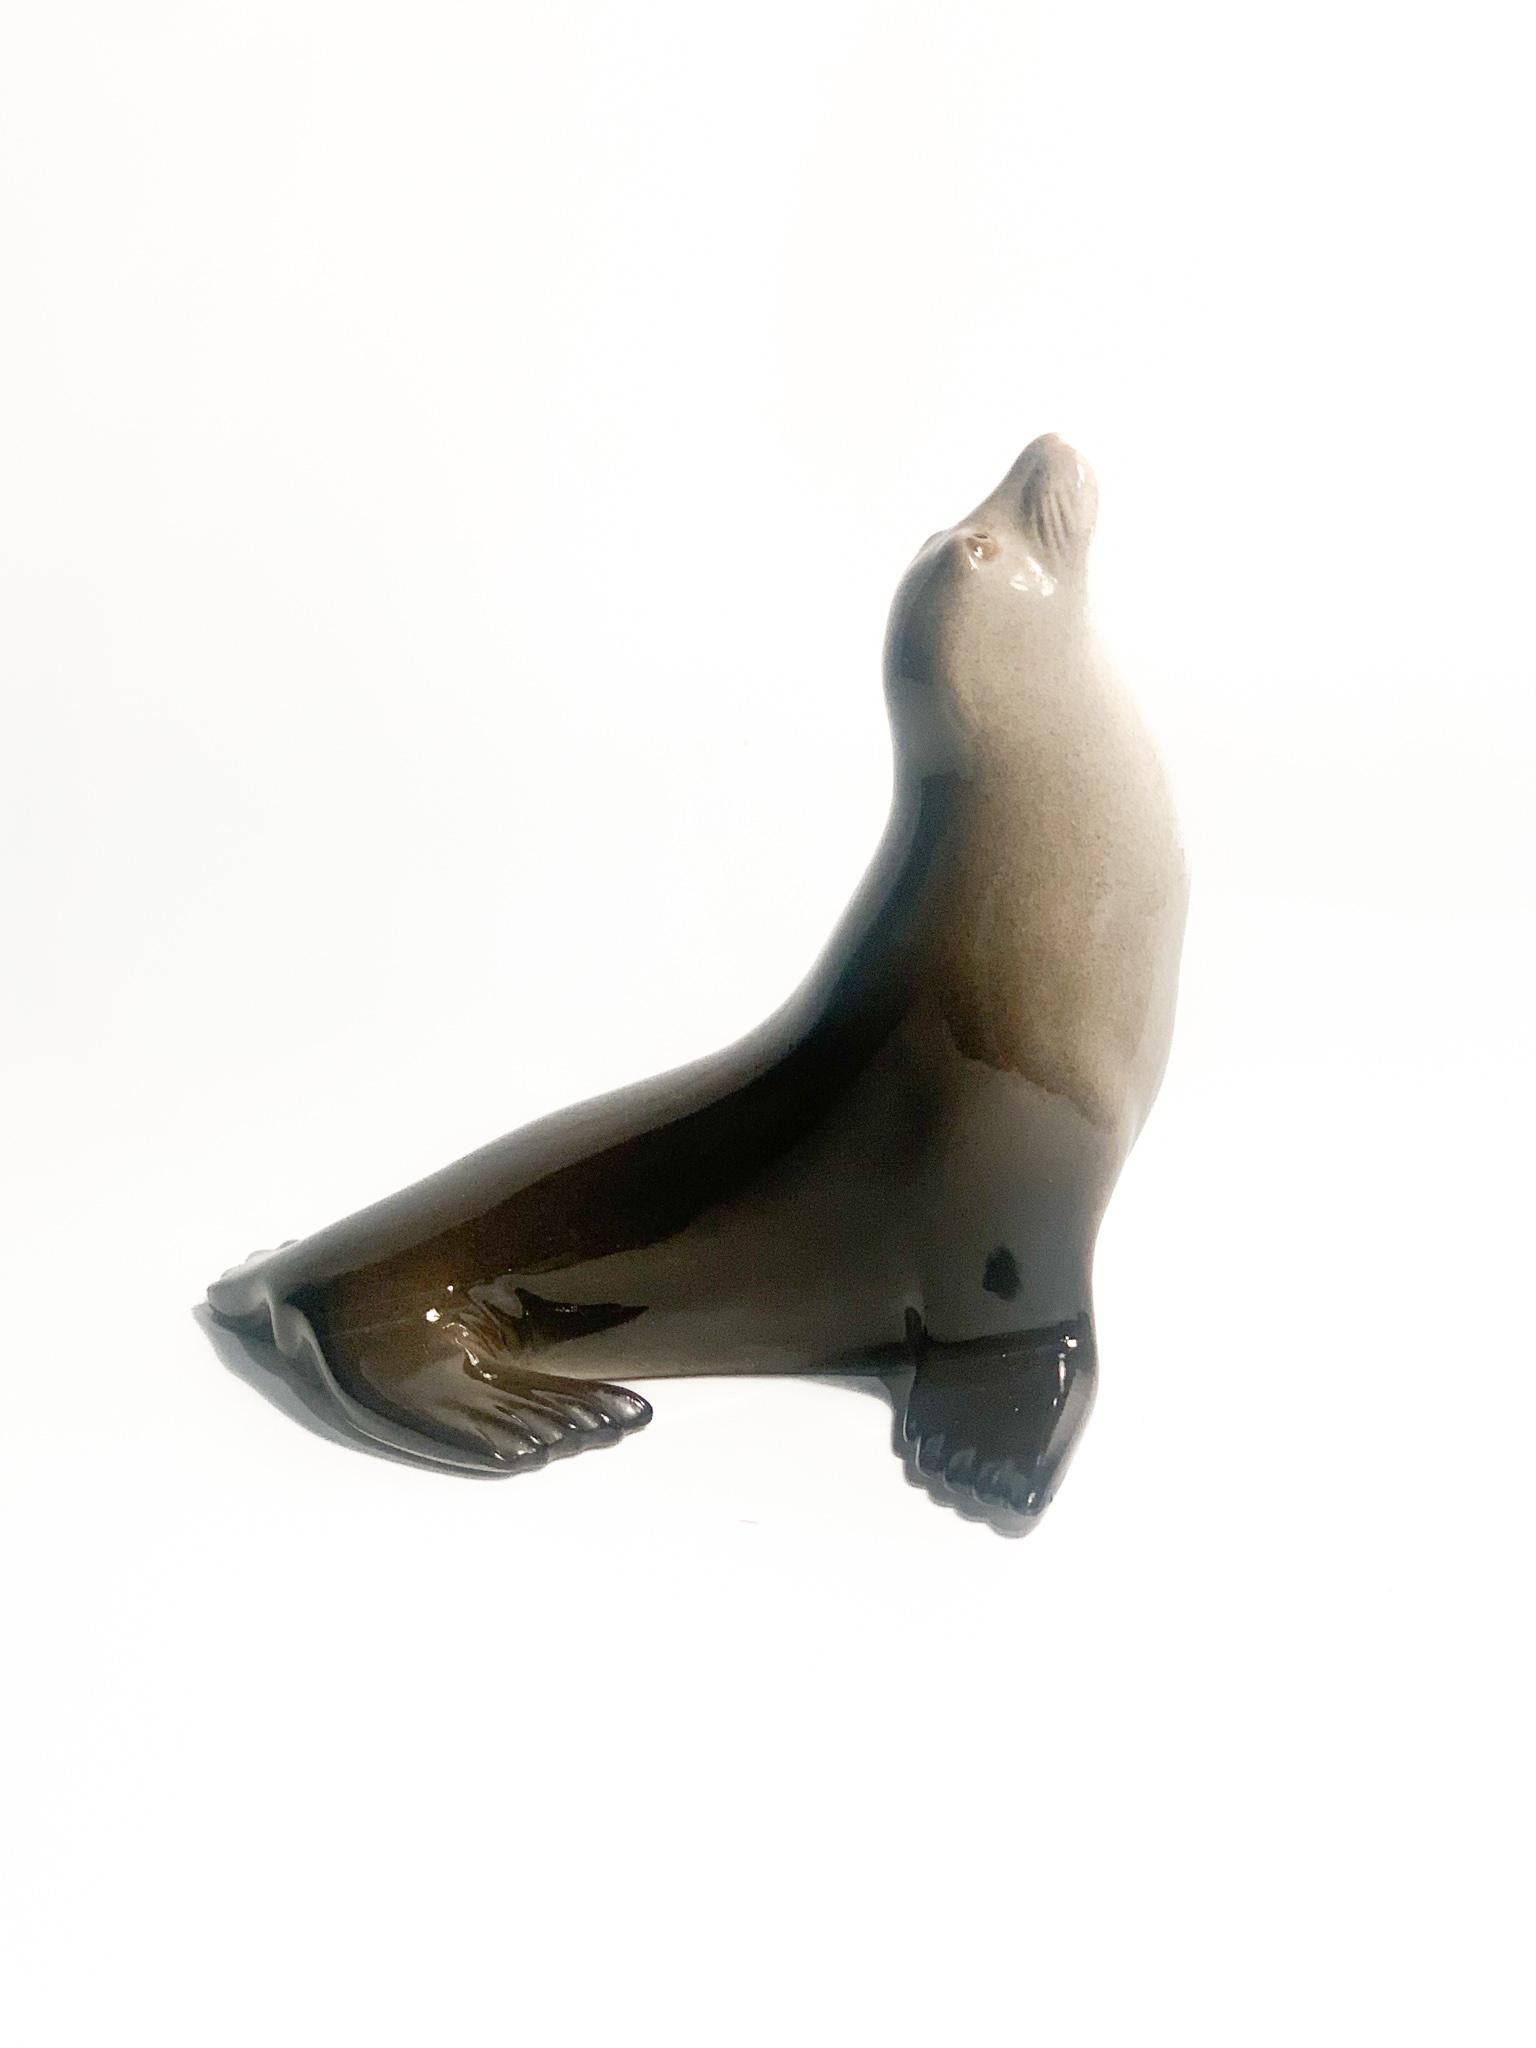 International Style URSS Ceramic Sculpture of a Seal from the 1940s For Sale